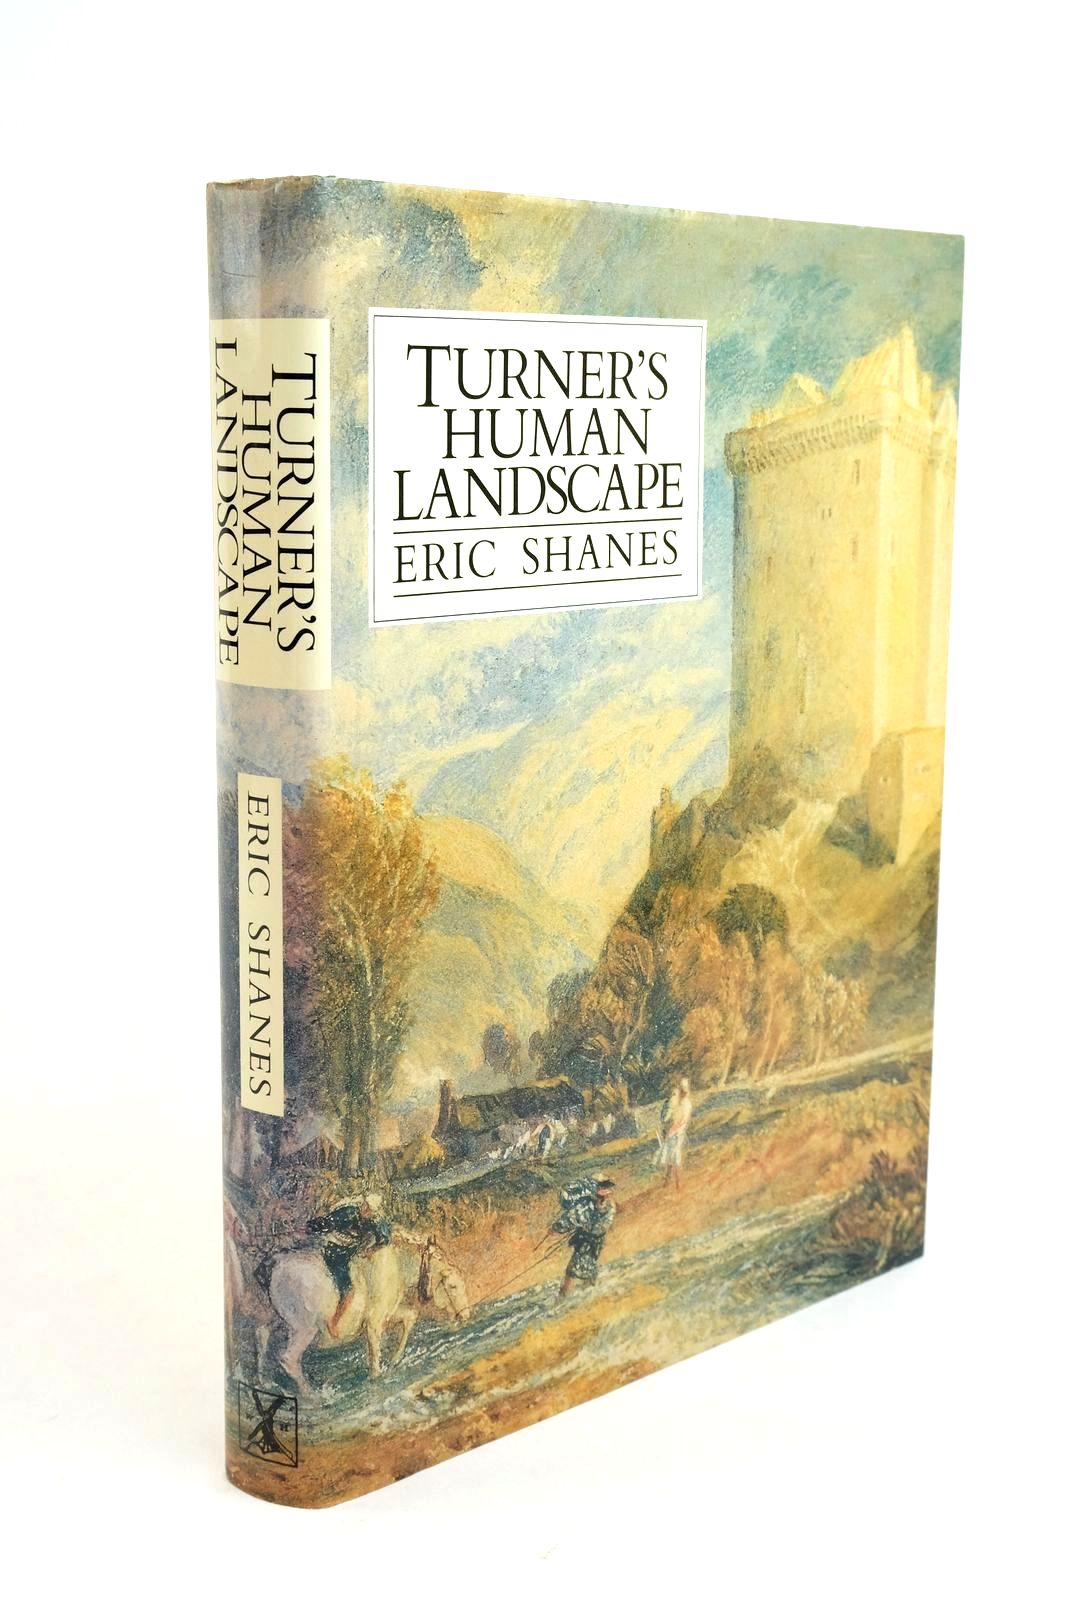 Photo of TURNER'S HUMAN LANDSCAPE written by Shanes, Eric illustrated by Turner, J.M.W. Turner, Joseph Mallord William published by William Heinemann Ltd. (STOCK CODE: 1322120)  for sale by Stella & Rose's Books